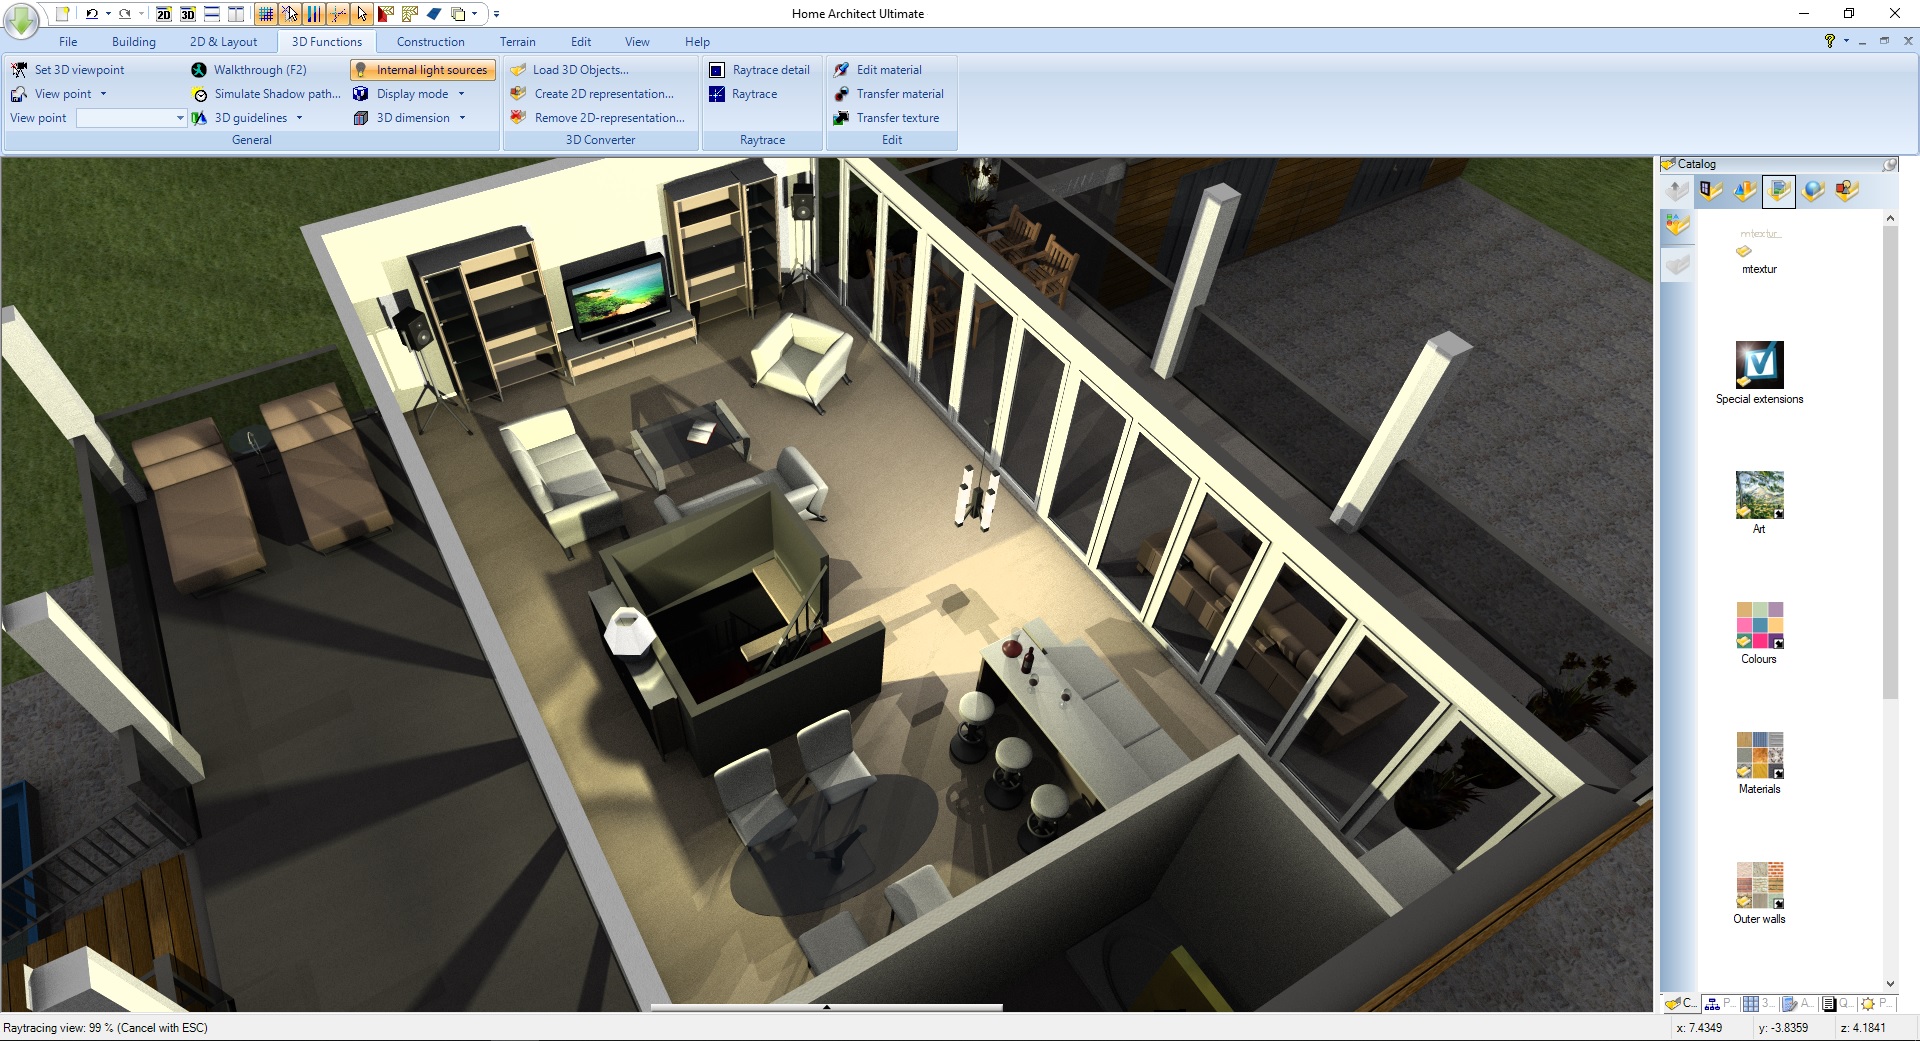 Save 67 On Home Architect Design Your Floor Plans In 3d Ultimate Edition On Steam,Small Sustainable House Designs